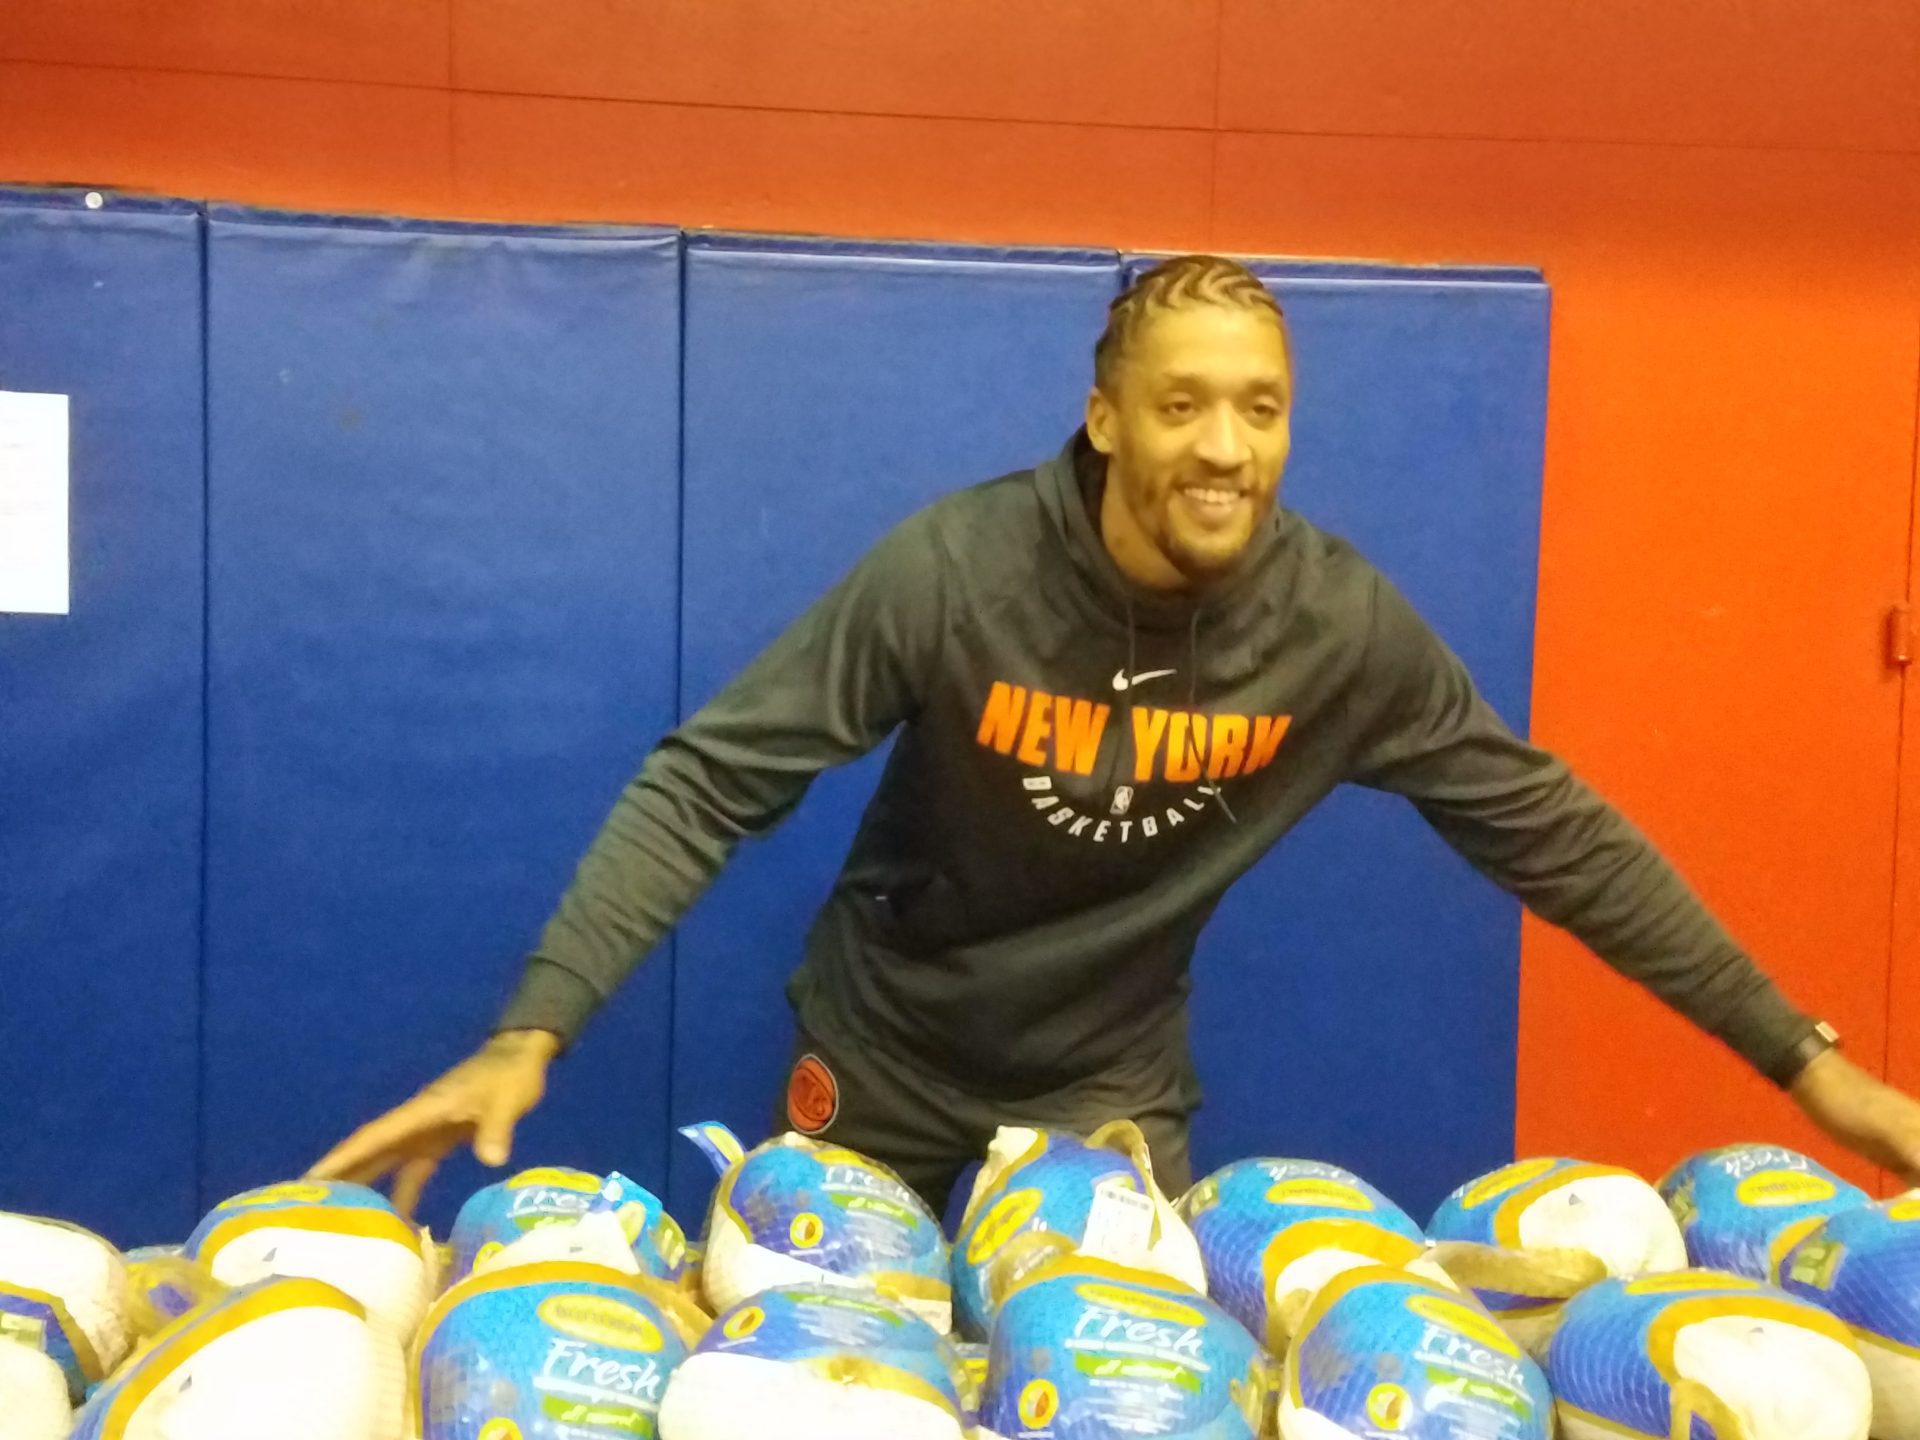 Michael Beasley in Harlem for Thanksgiving turkey donation (Photo by Derrel Johnson for Steed Media Service)